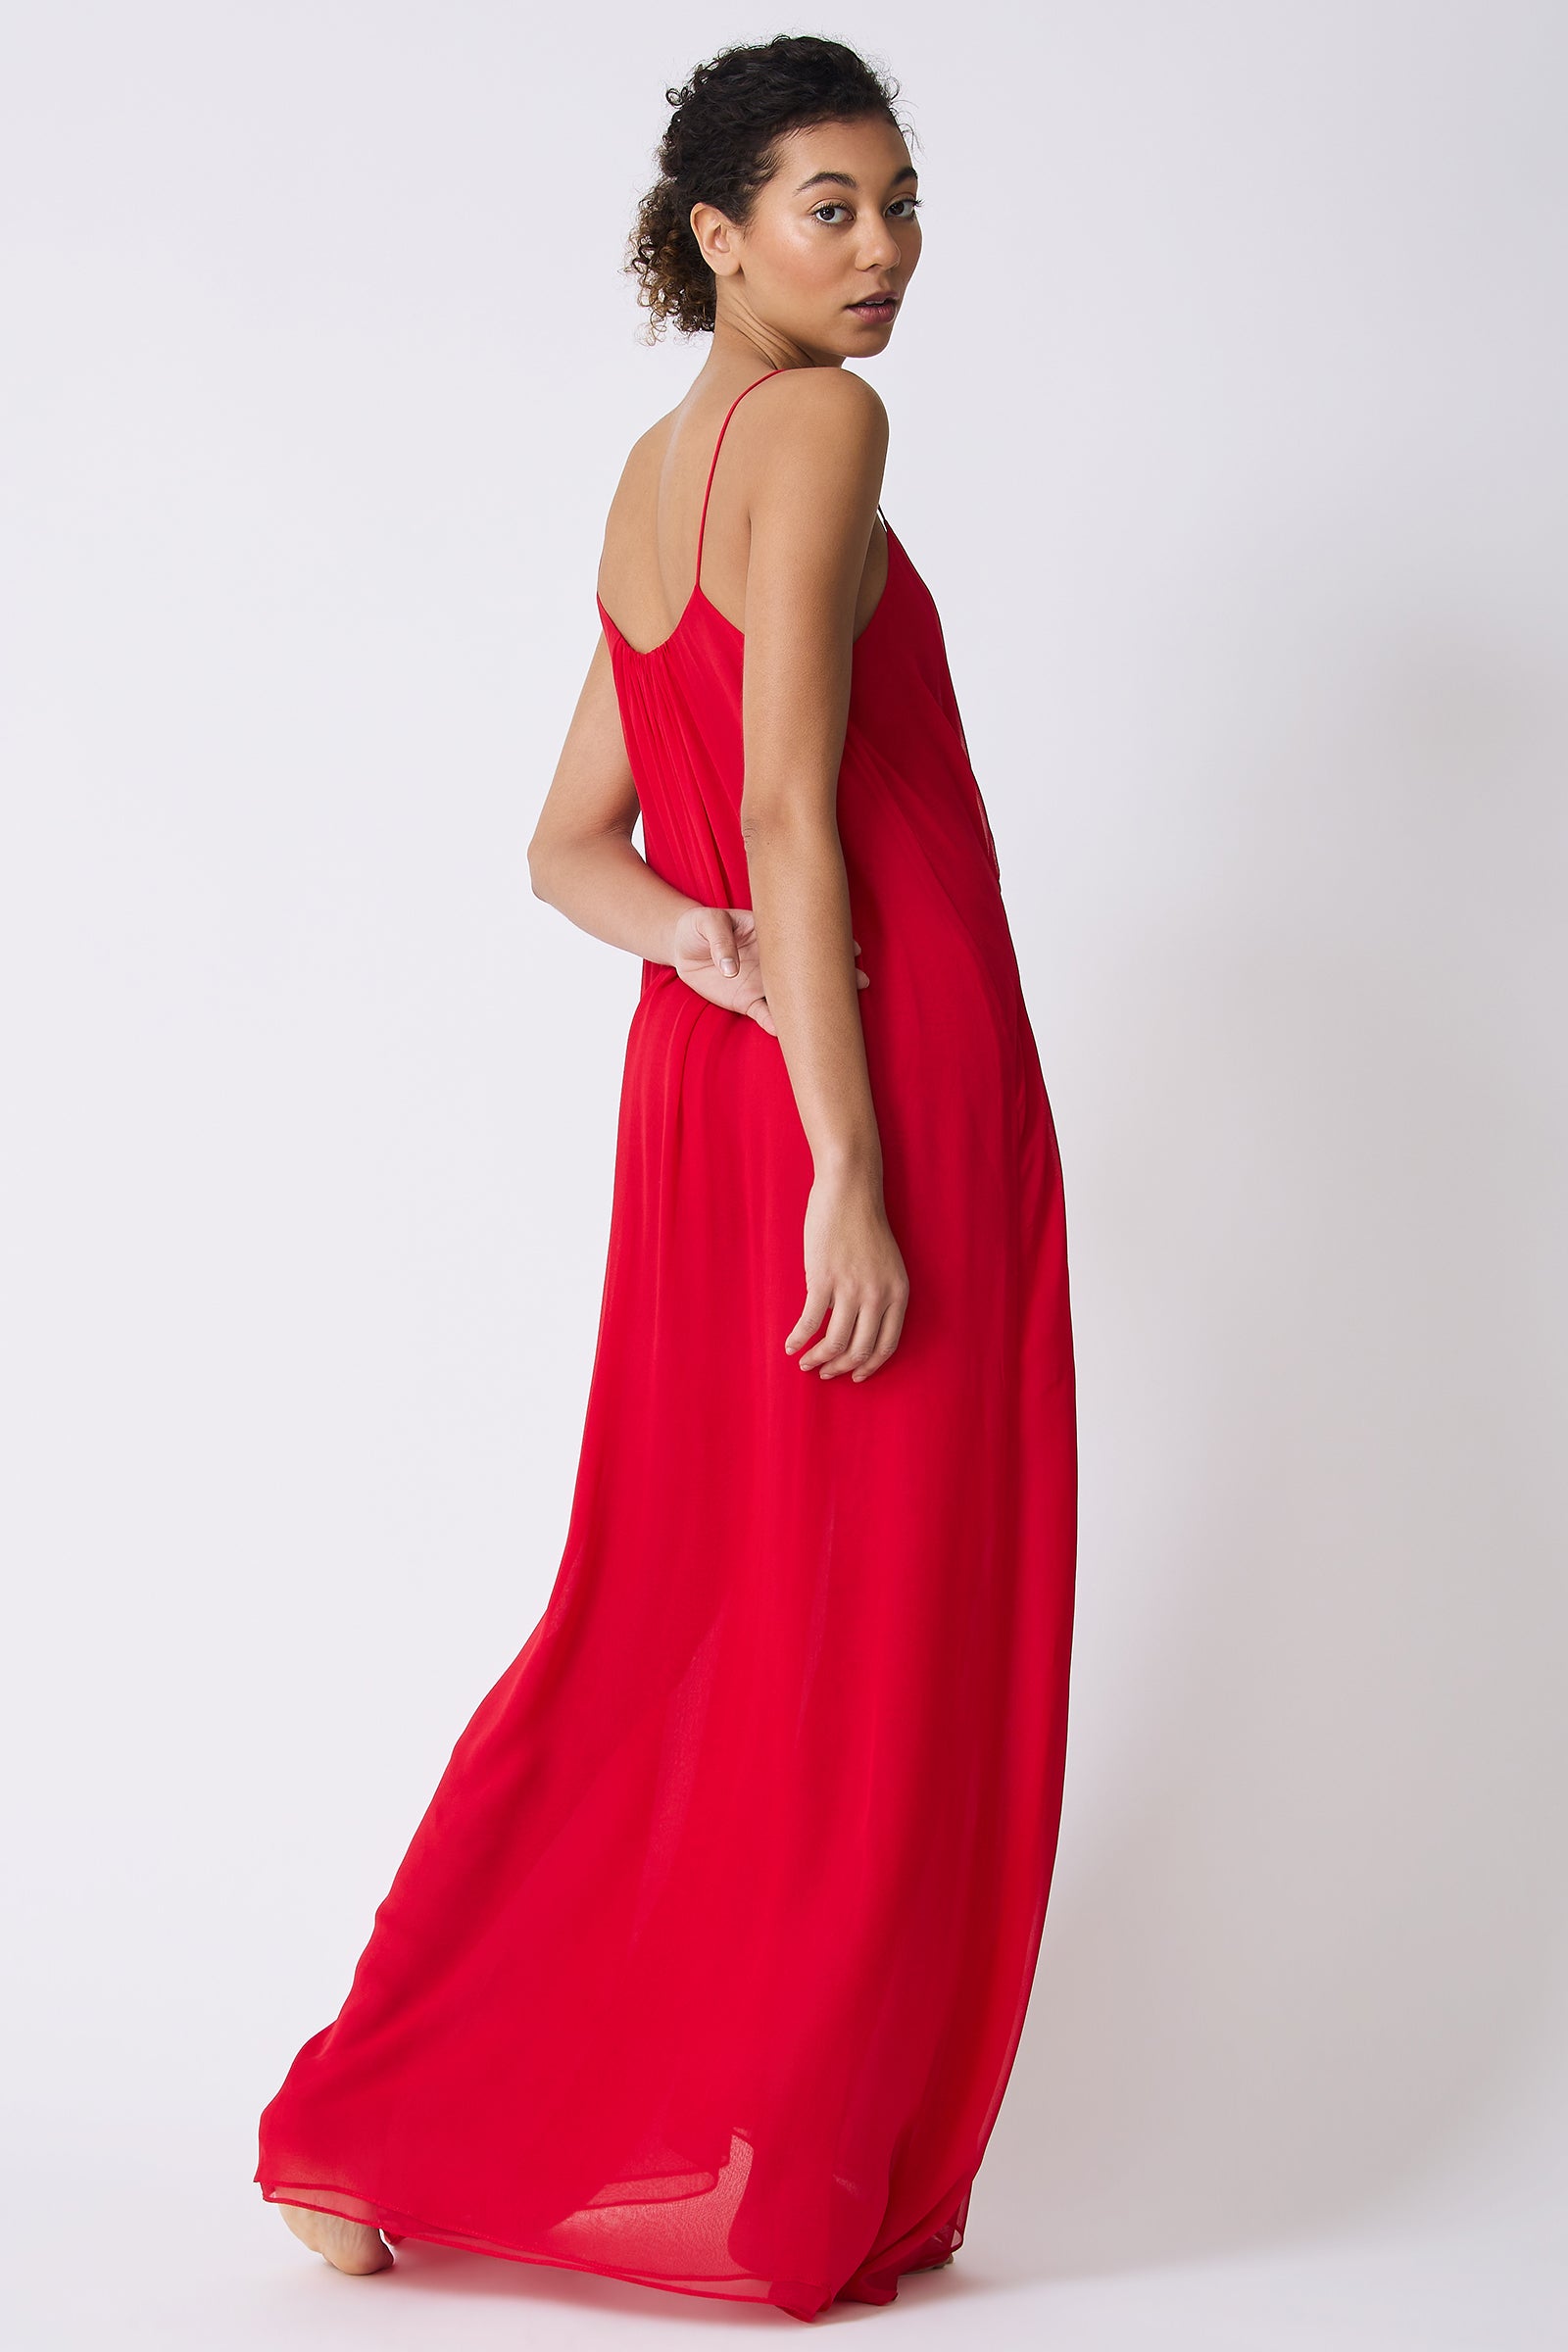 Kal Rieman Cora Shirred Maxi Dress in Red on model full back view